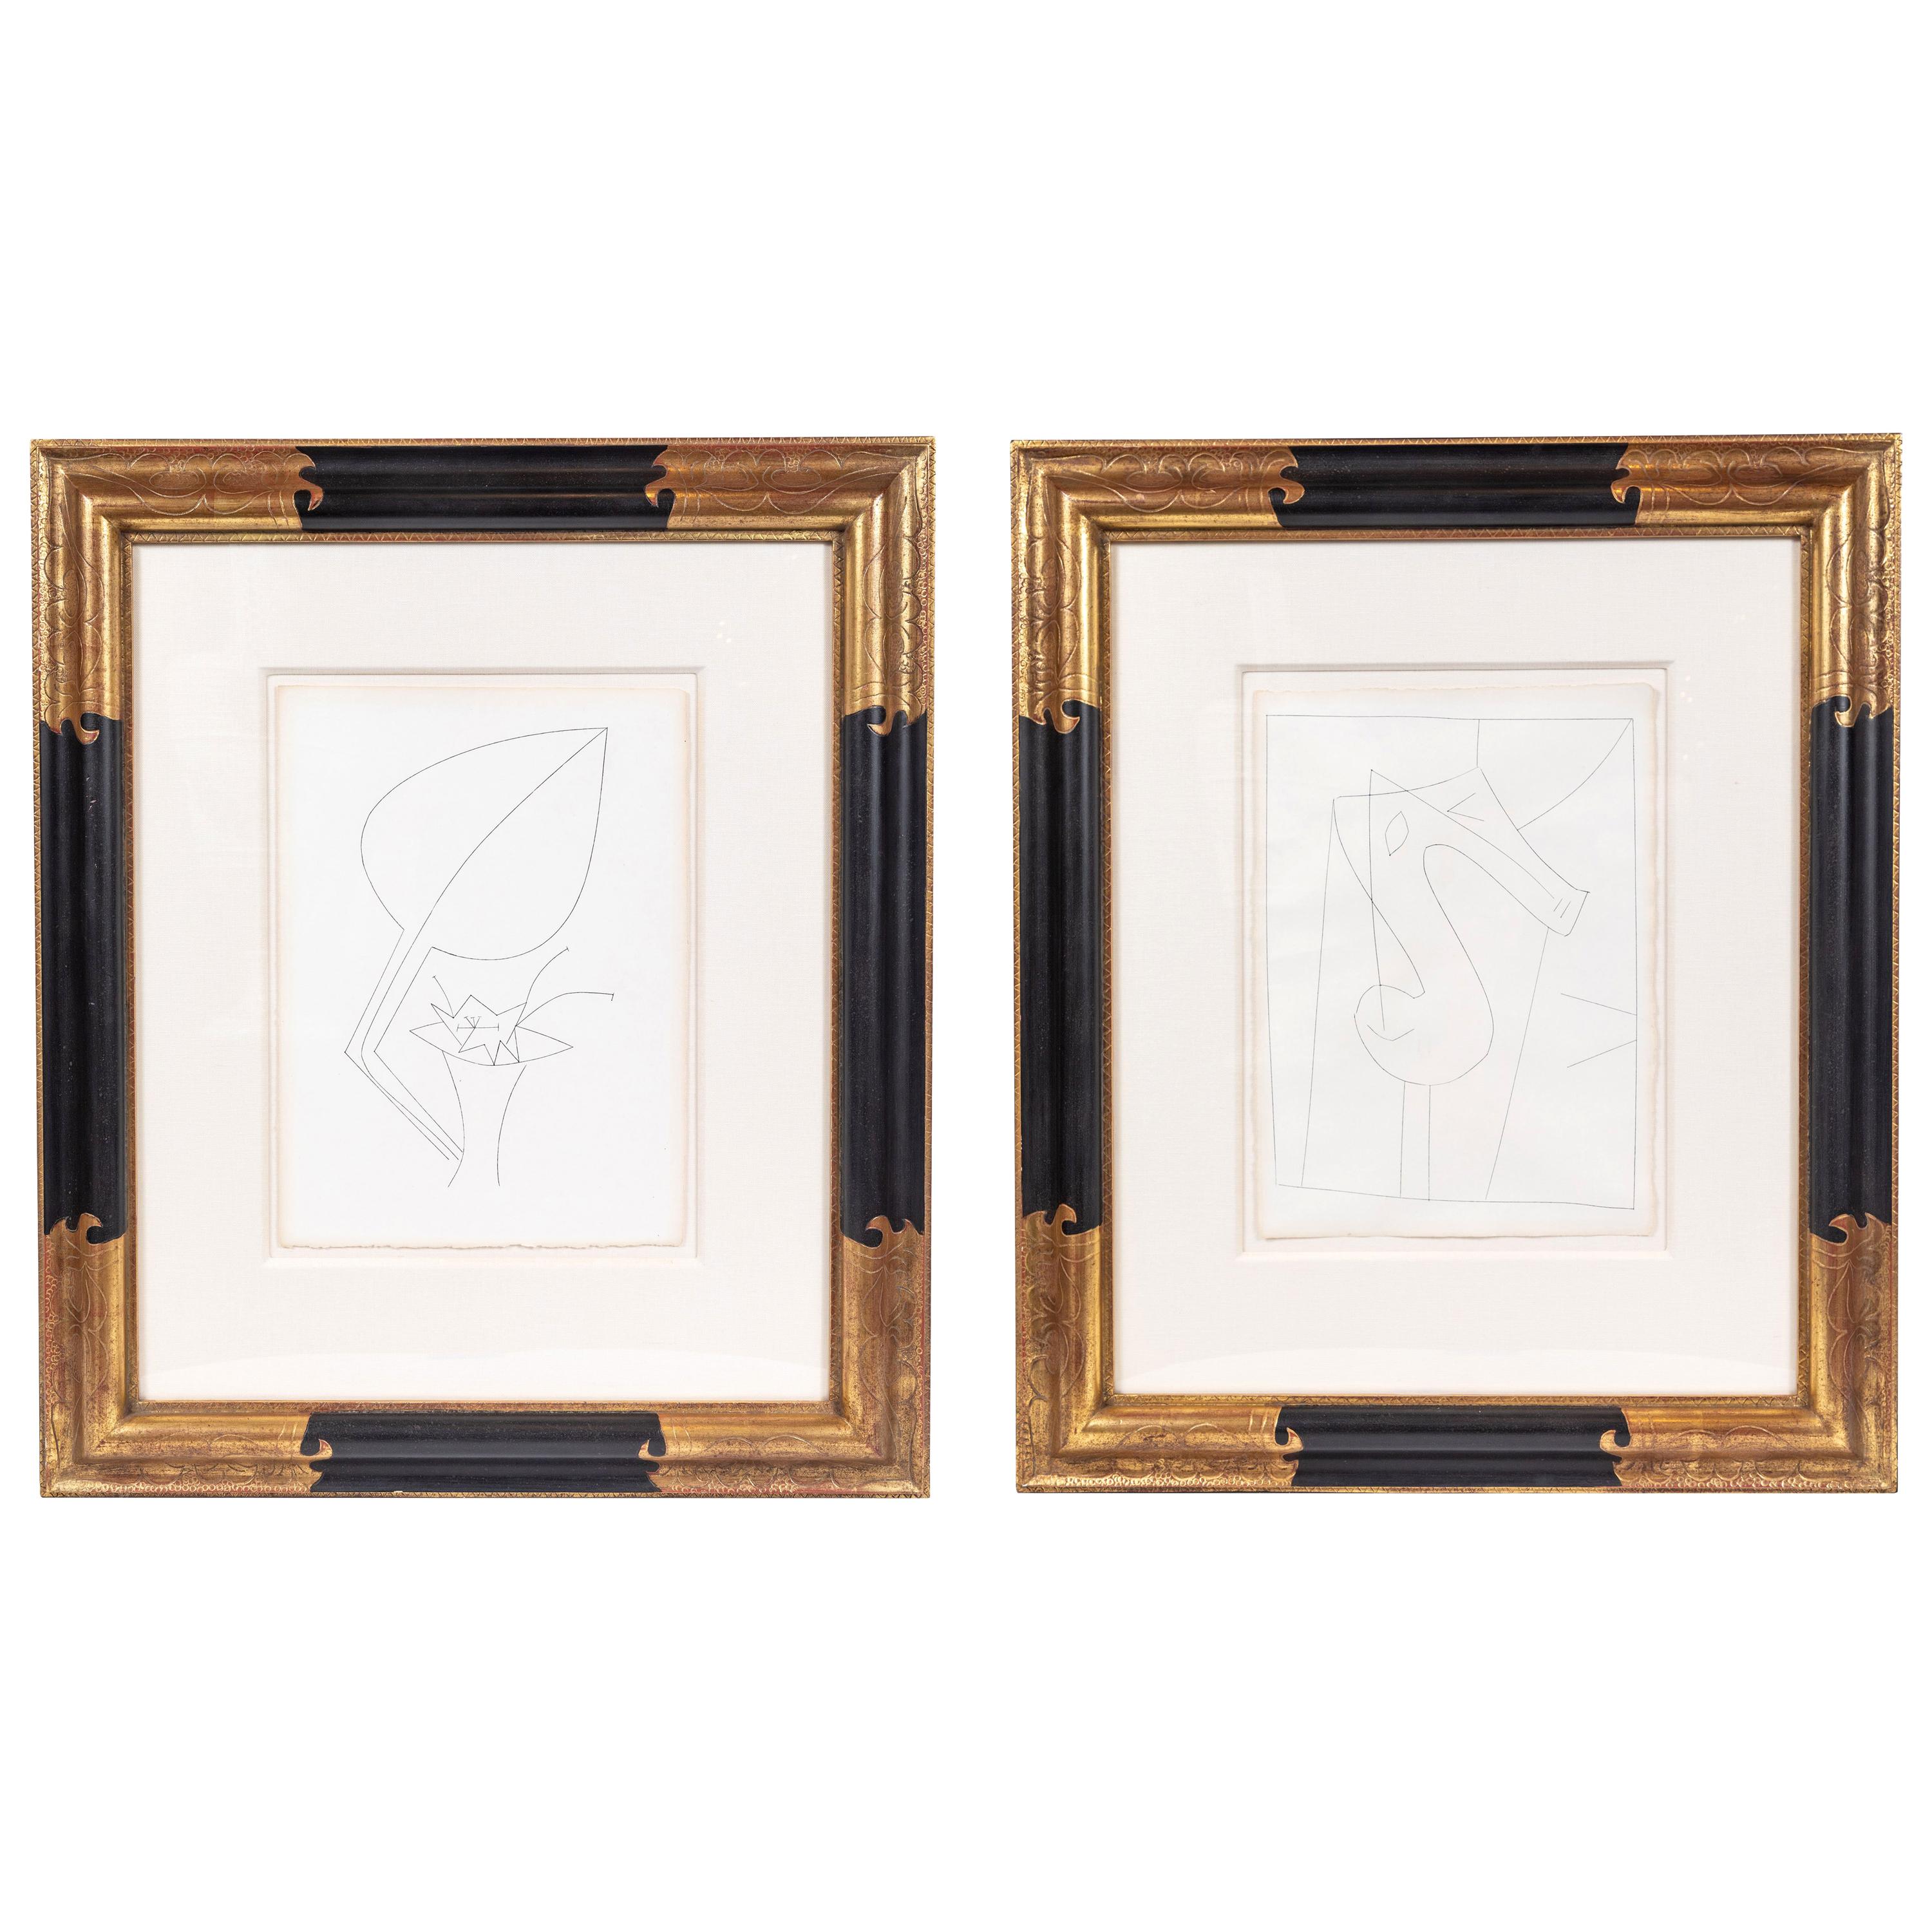 Stunningly Framed, Picasso Book Plates